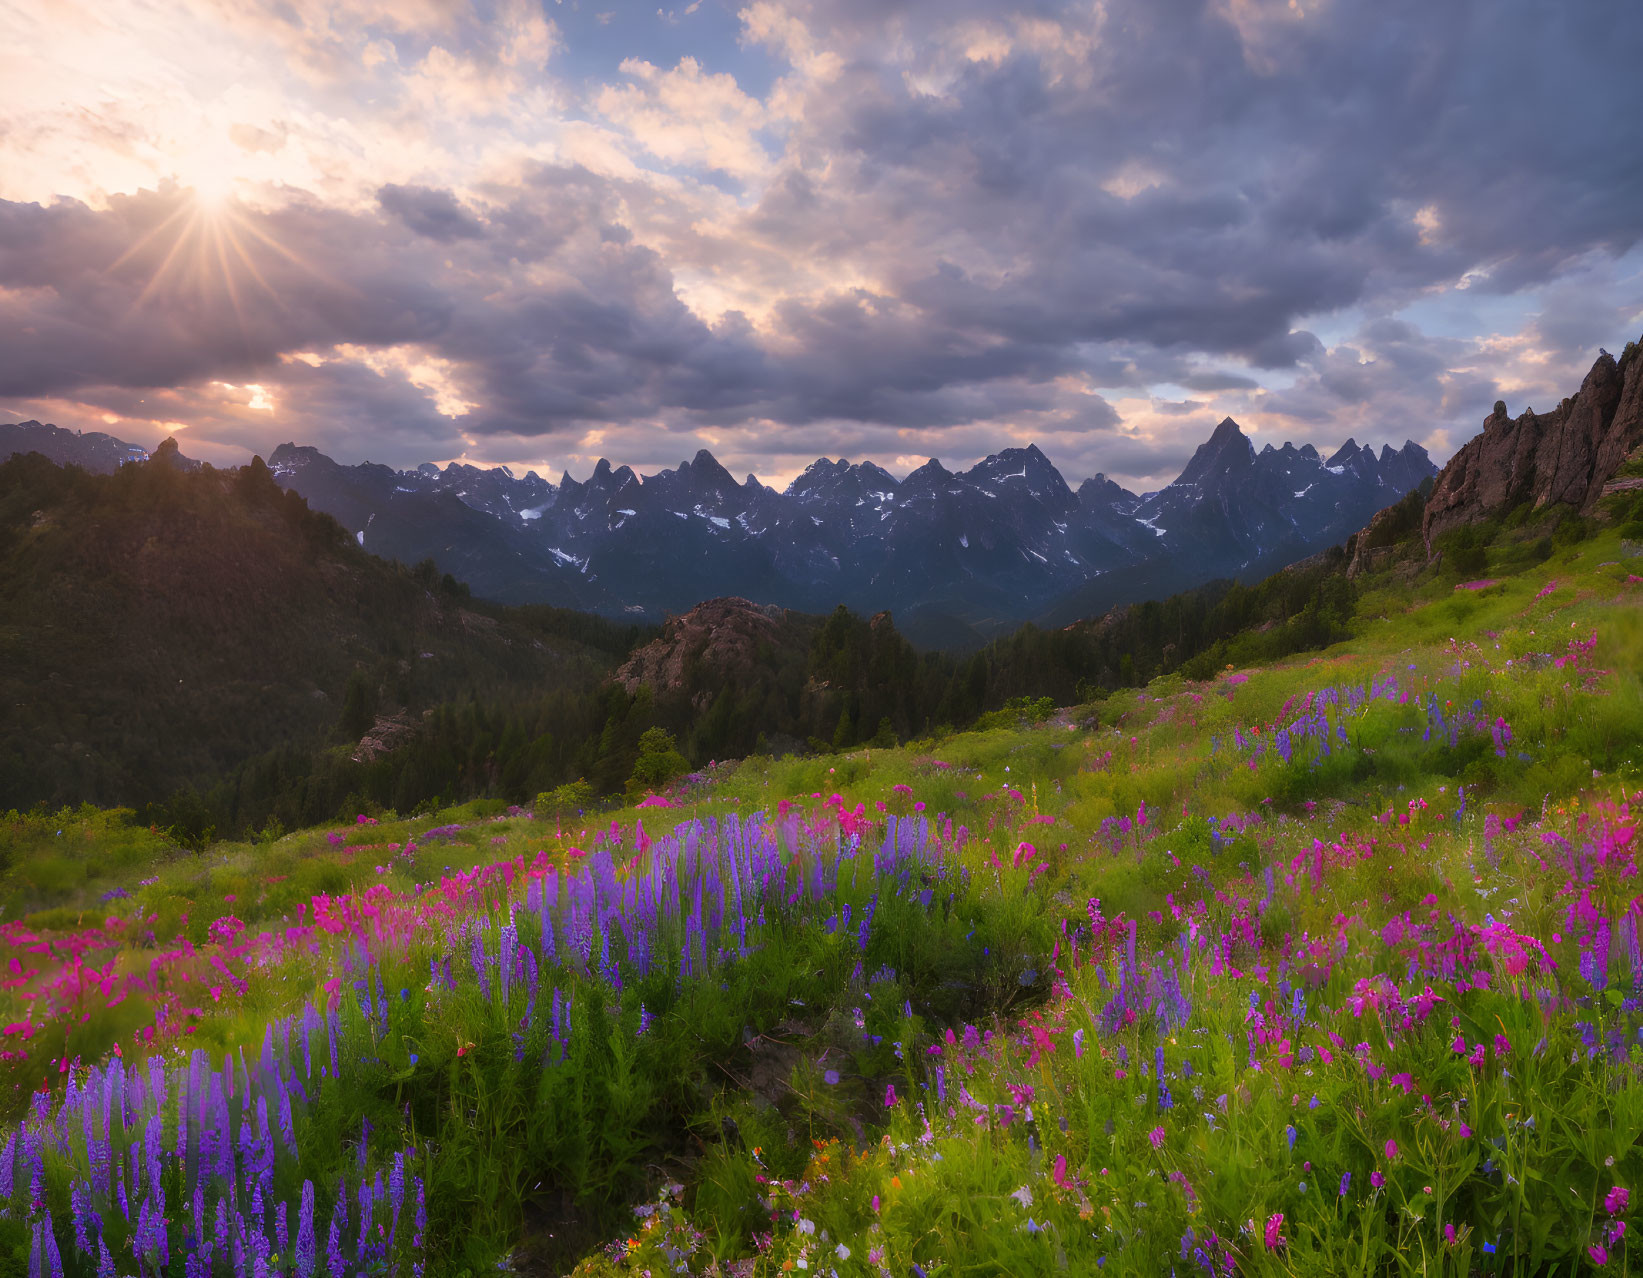 Vibrant sunset over mountain range with purple wildflowers.